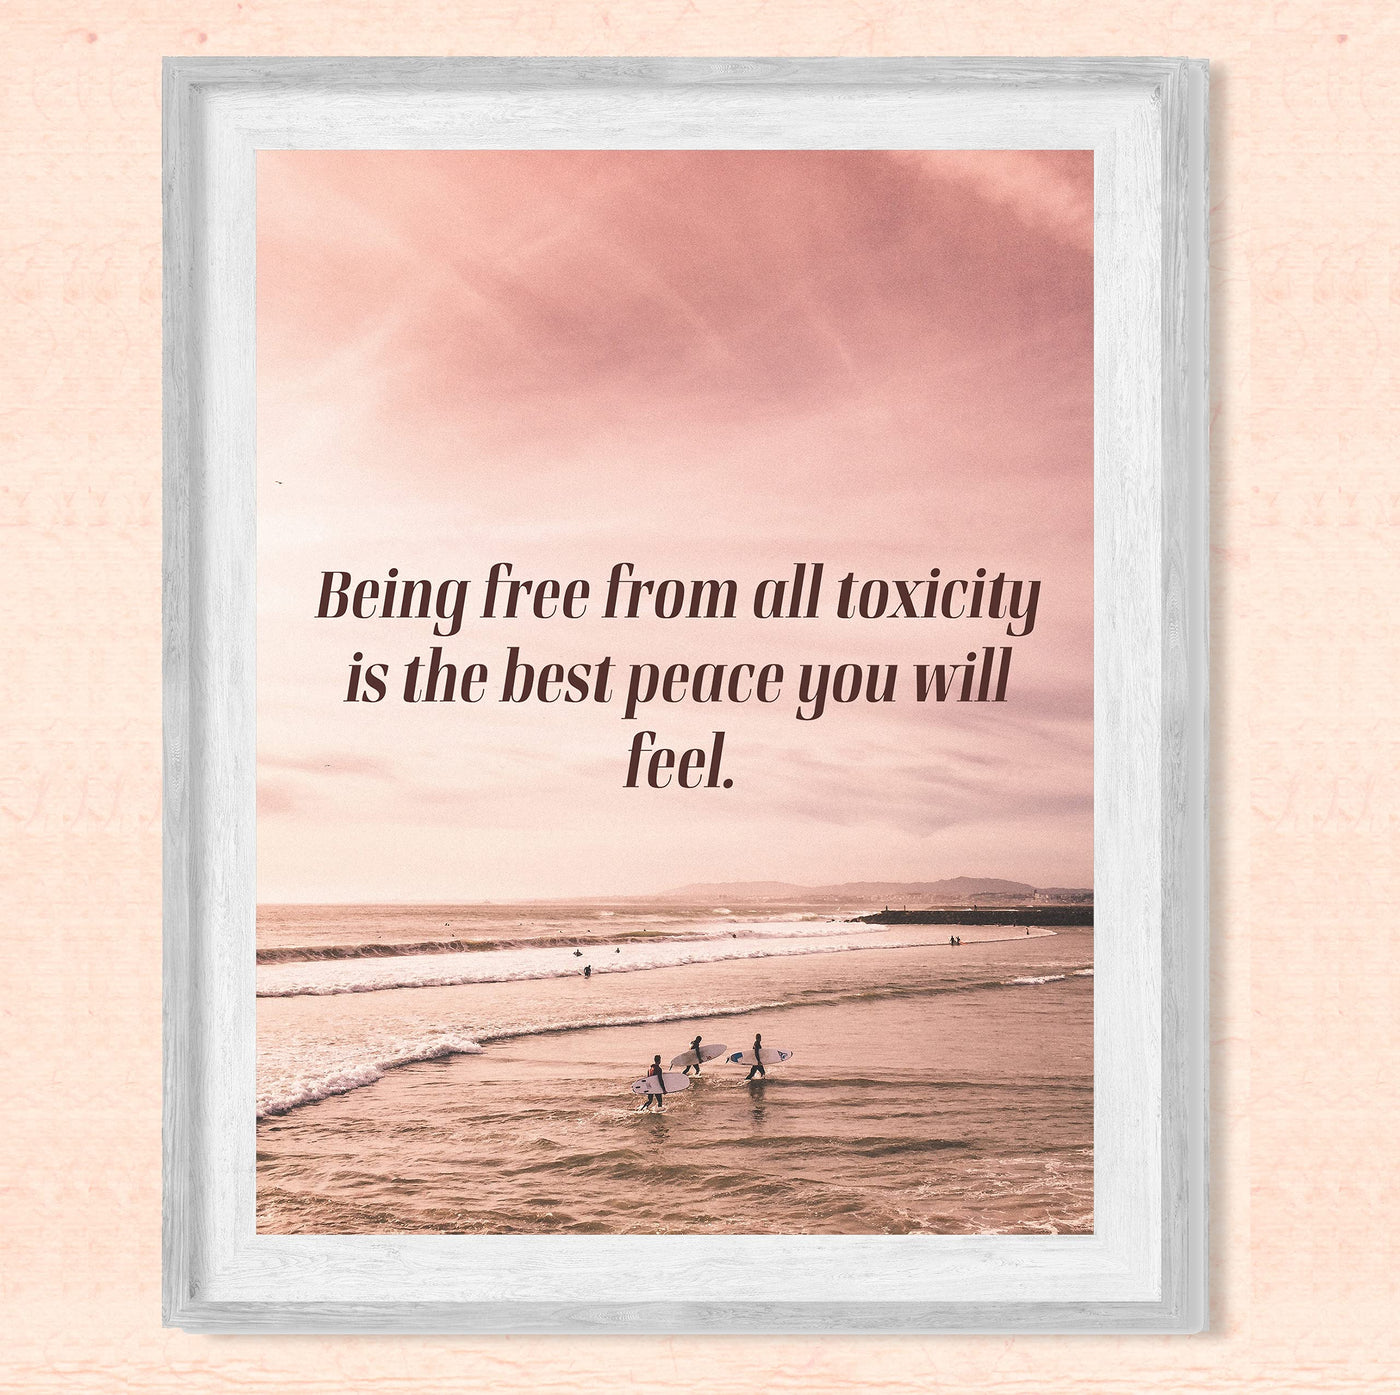 Being Free From Toxicity-Best Peace You'll Feel-Inspirational Quotes Wall Art-10 x 8"-Beach Sunset Print w/Surfers & Ocean Photo-Ready to Frame. Spiritual Home-Office-Studio Decor. Great Zen Gift!